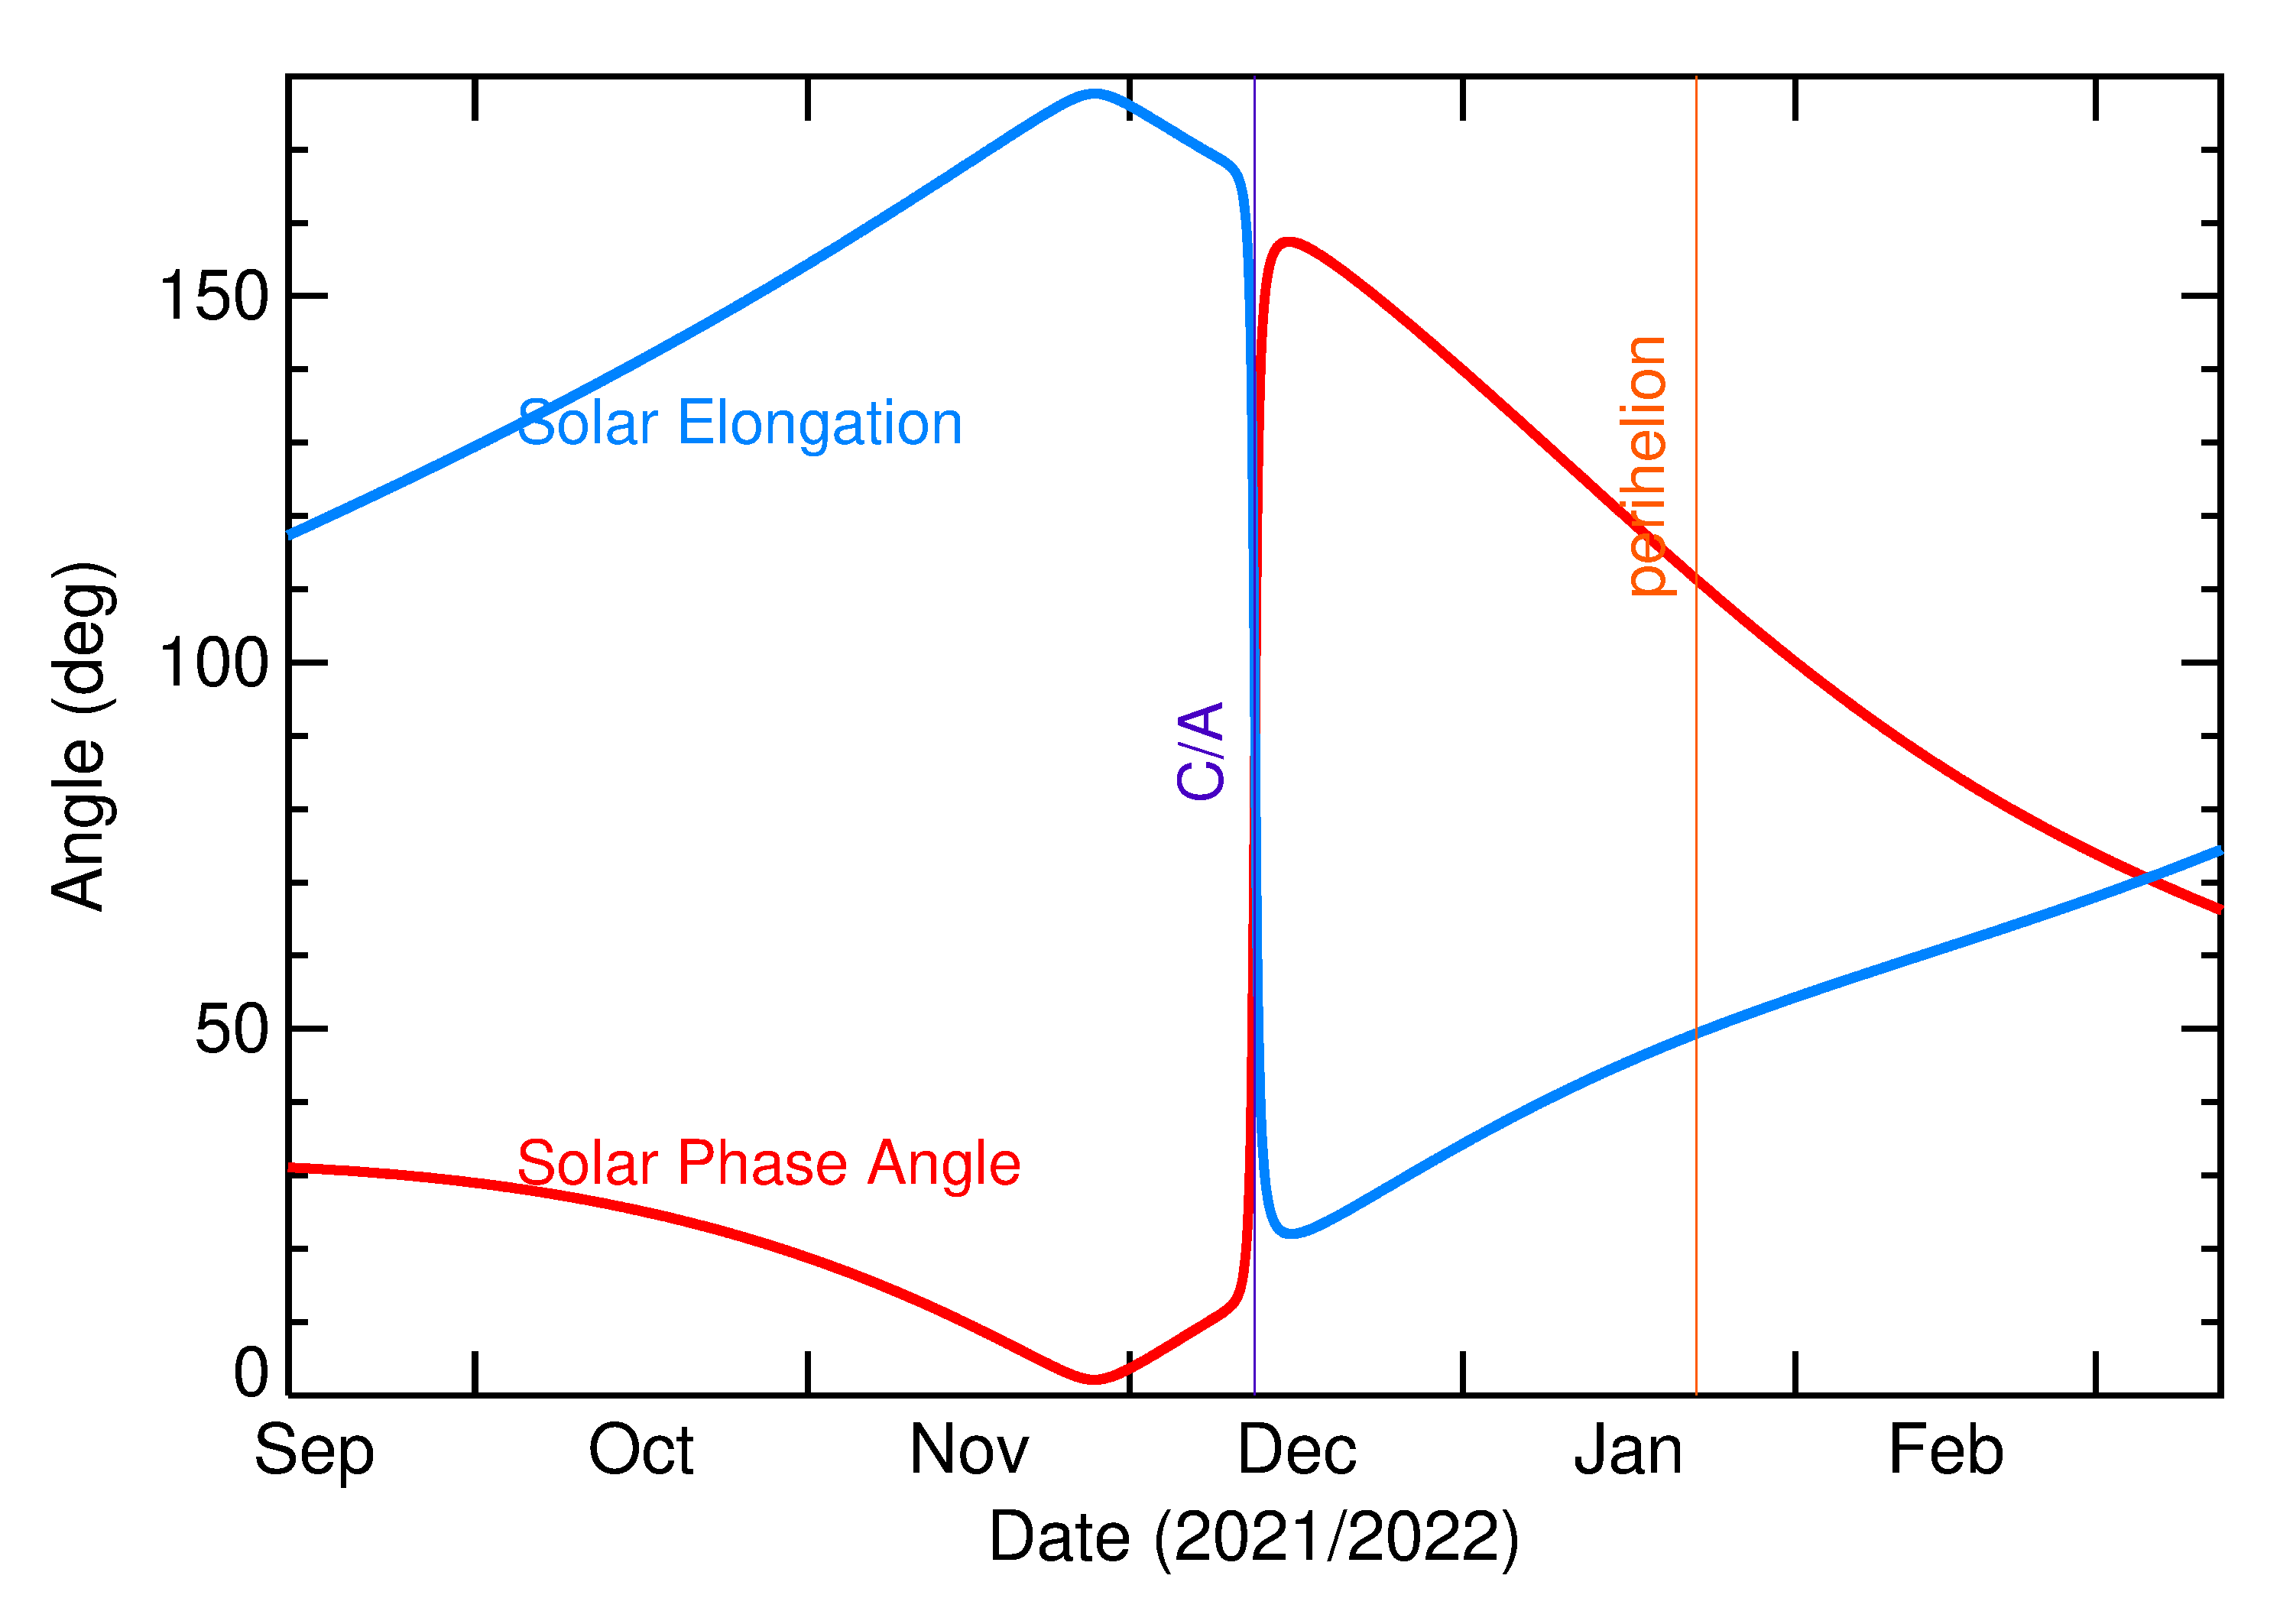 Solar Elongation and Solar Phase Angle of 2021 XX4 in the months around closest approach